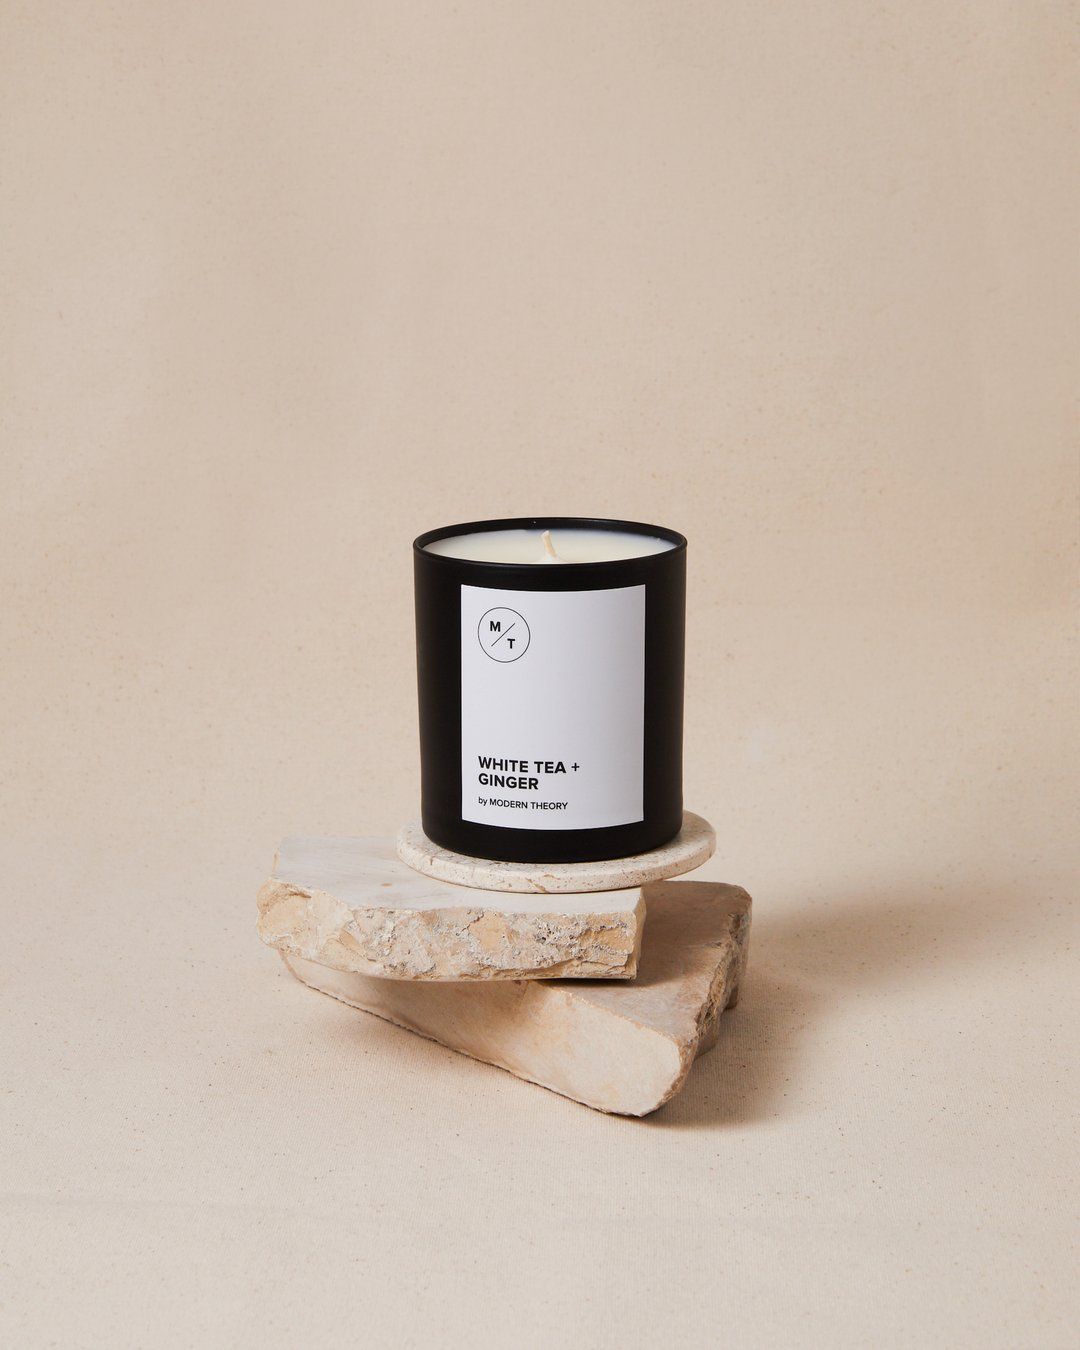 Product Image for White Tea + Ginger Candle